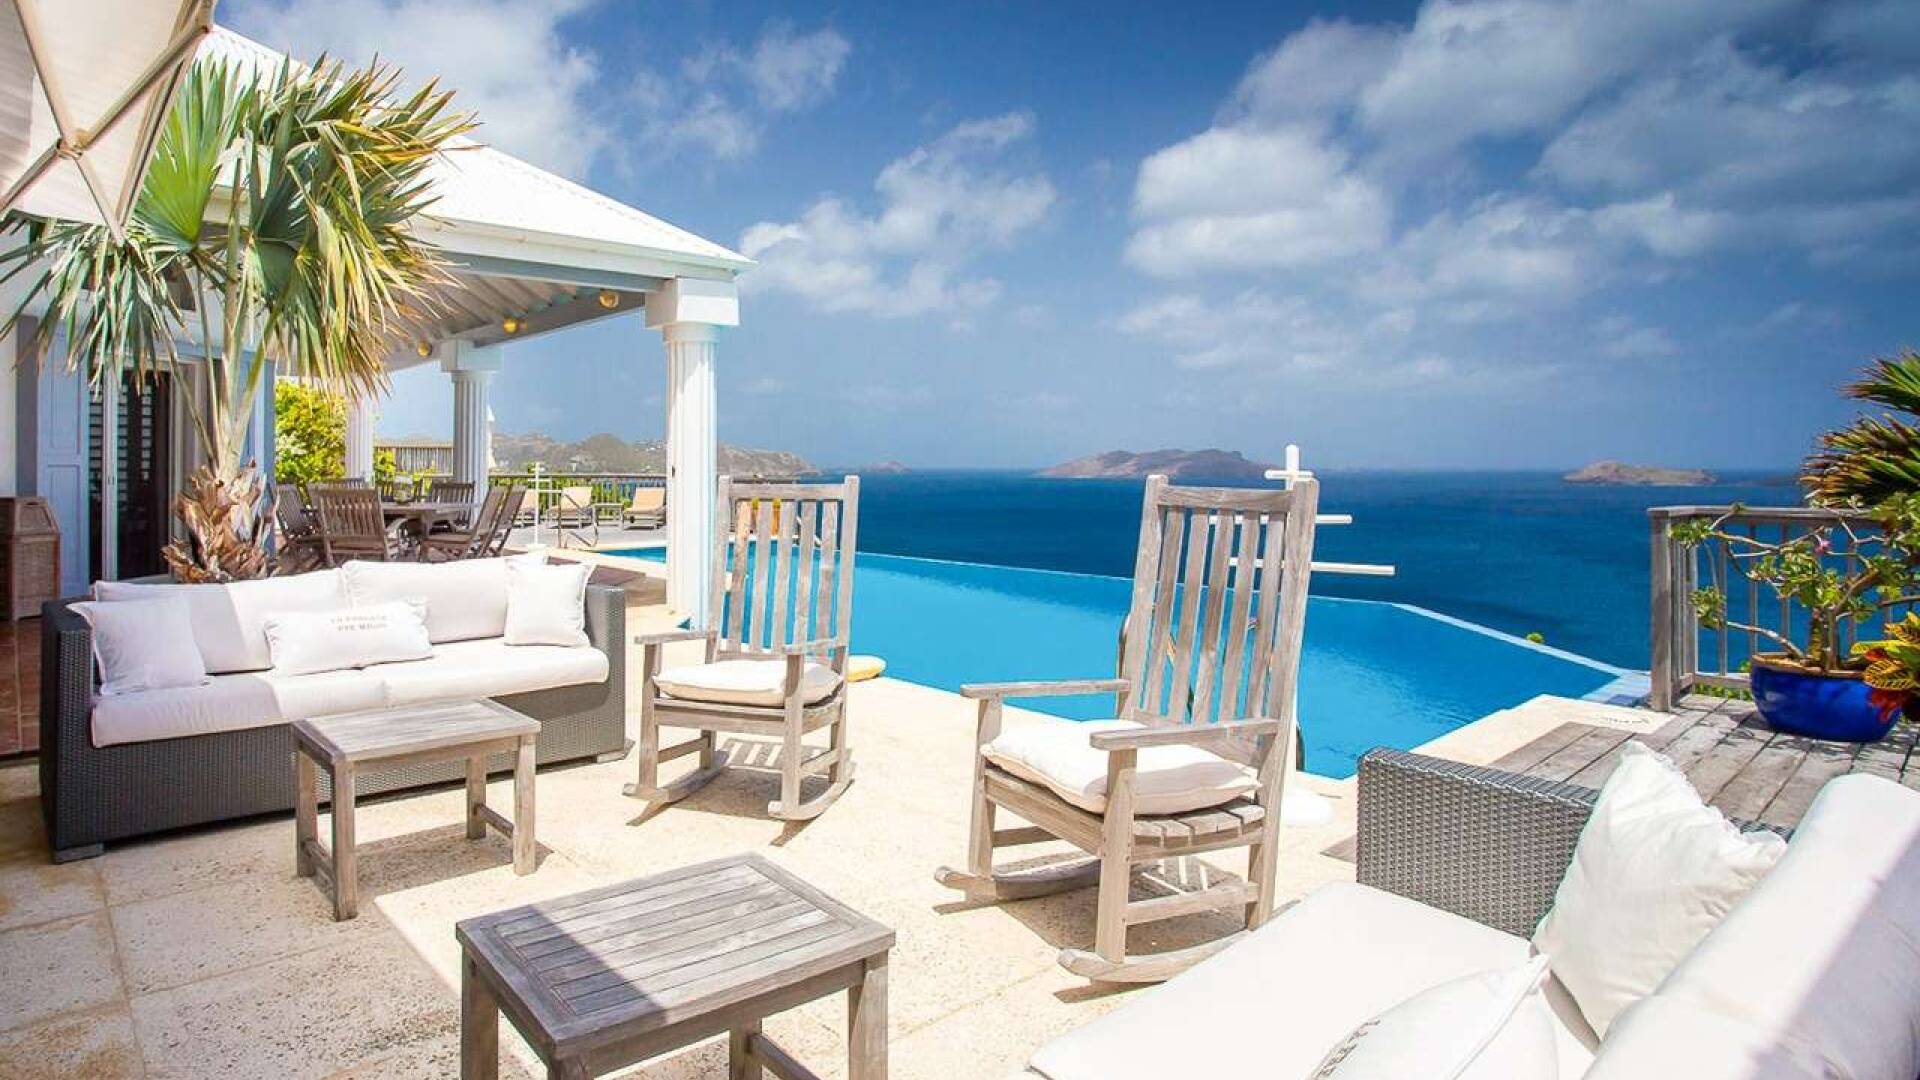 Patio at WV FRE, Pointe Milou, St. Barthelemy